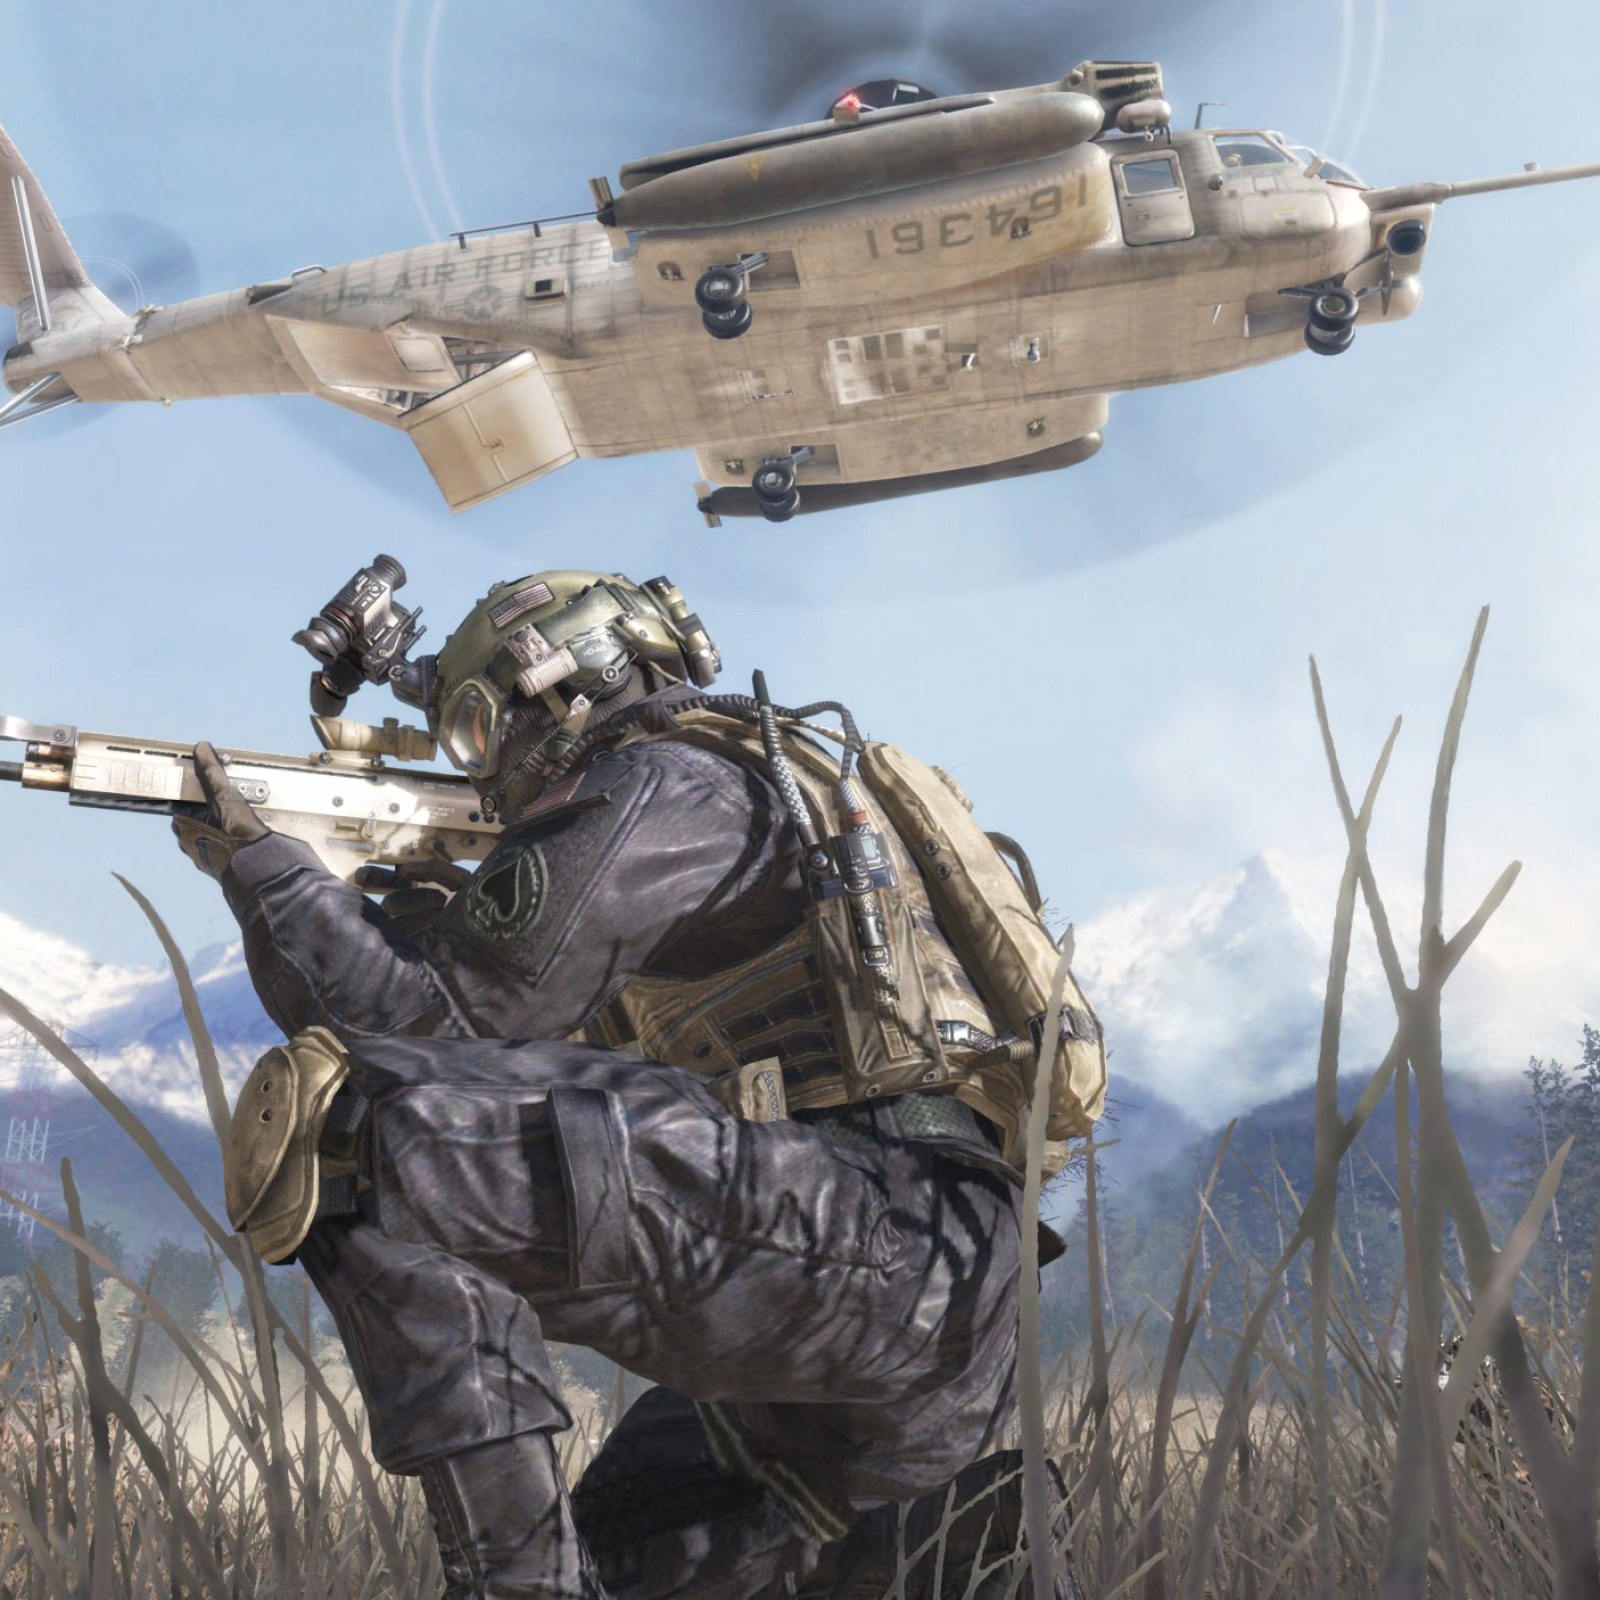 Call of Duty: Modern Warfare 2 Remastered' May Release Soon With Campaign